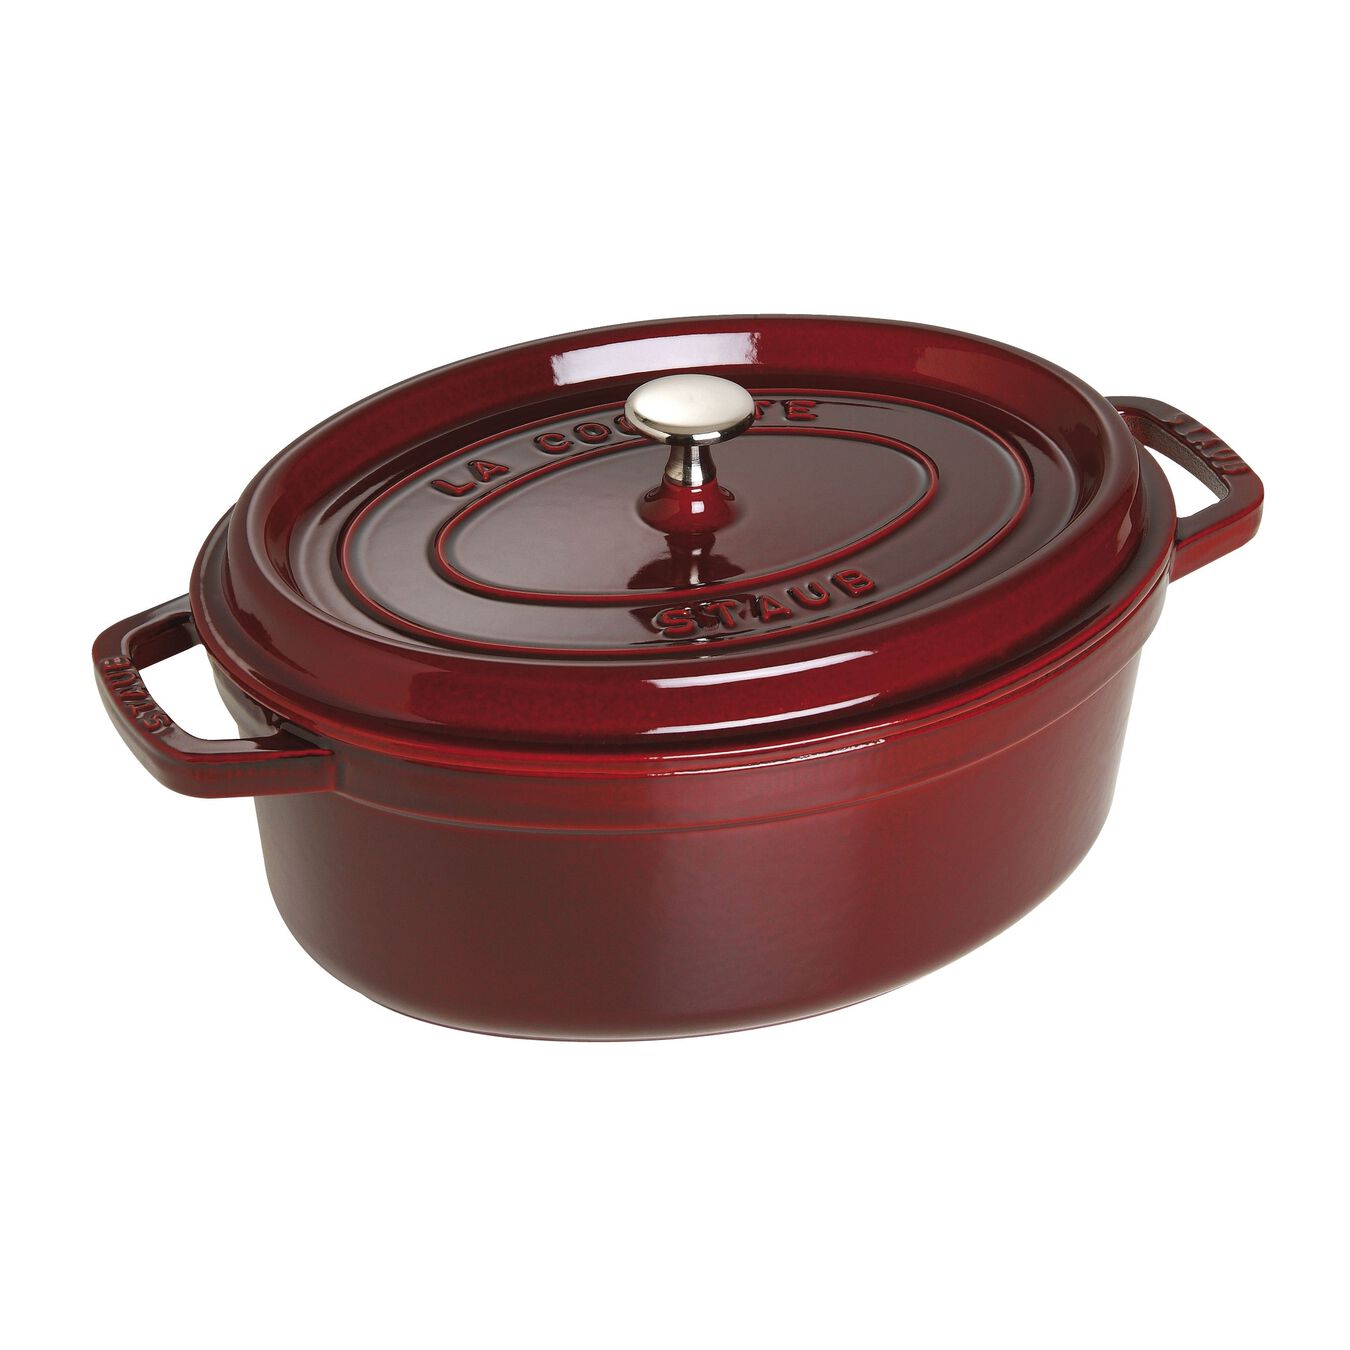 Cocotte 33 cm, oval, Grenadine-Rot, Gusseisen,,large 4